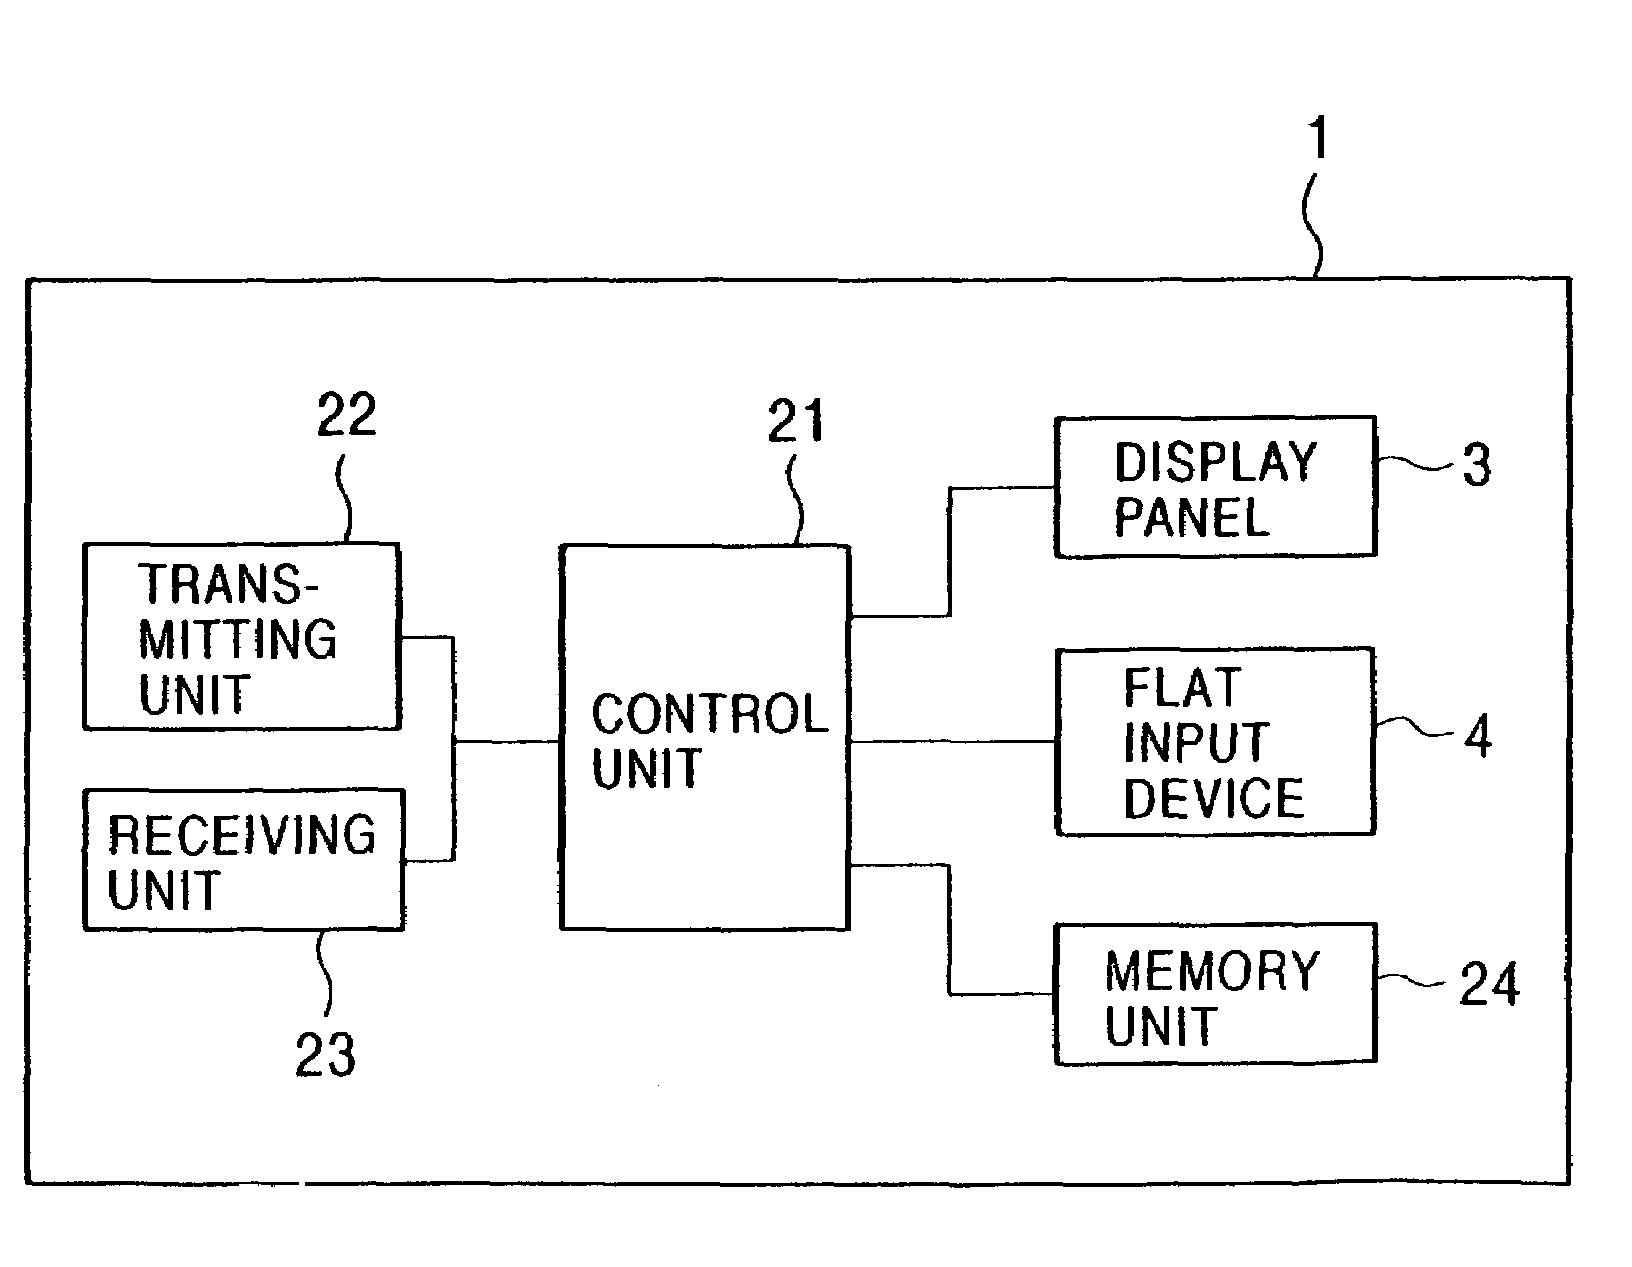 Input apparatus for performing input operation corresponding to indication marks and coordinate input operation on the same operational plane